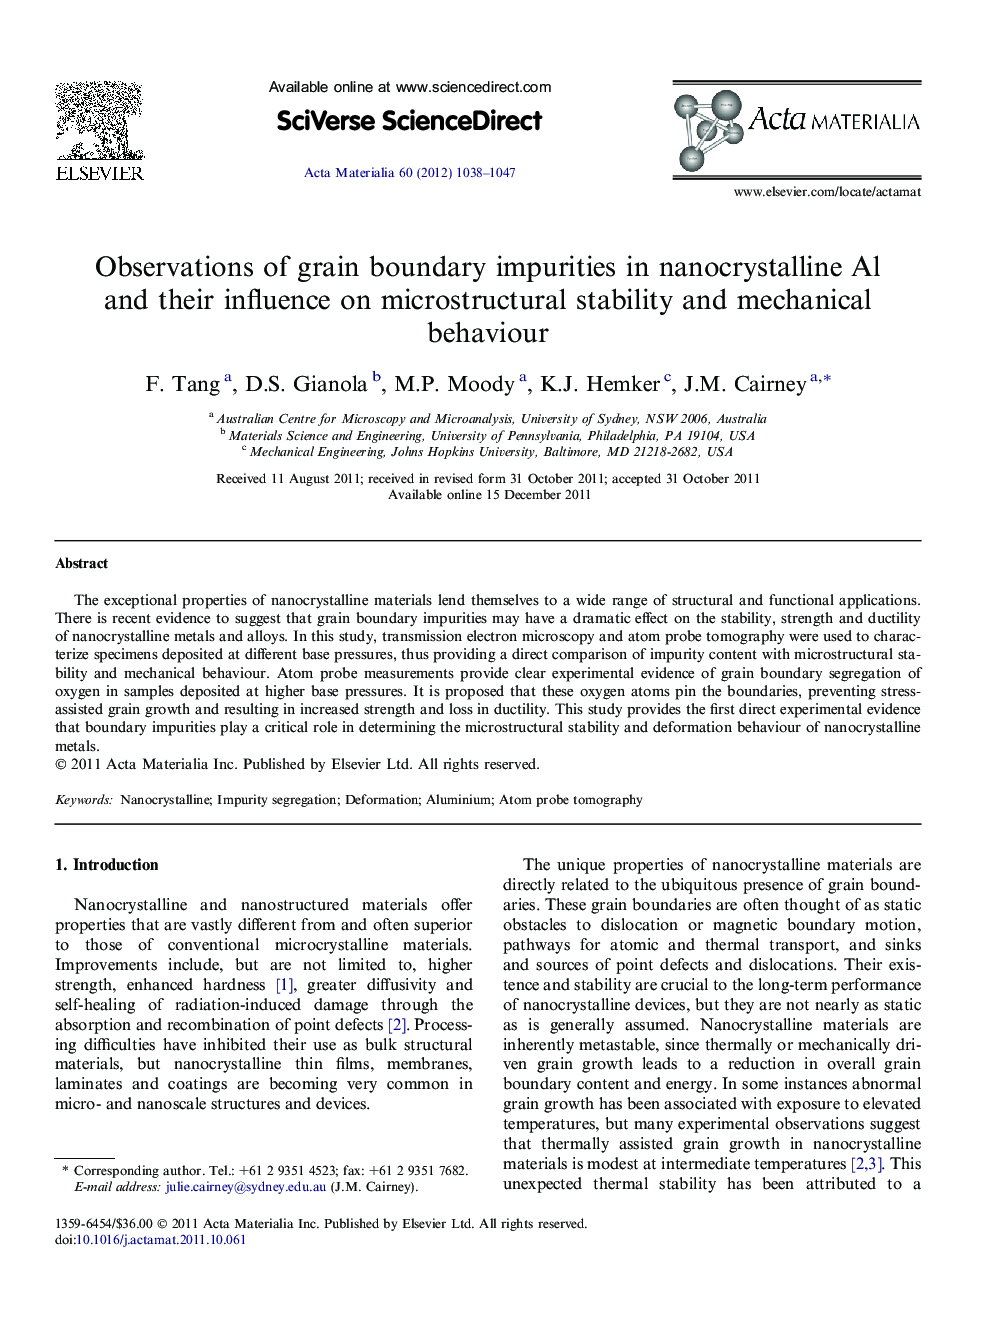 Observations of grain boundary impurities in nanocrystalline Al and their influence on microstructural stability and mechanical behaviour